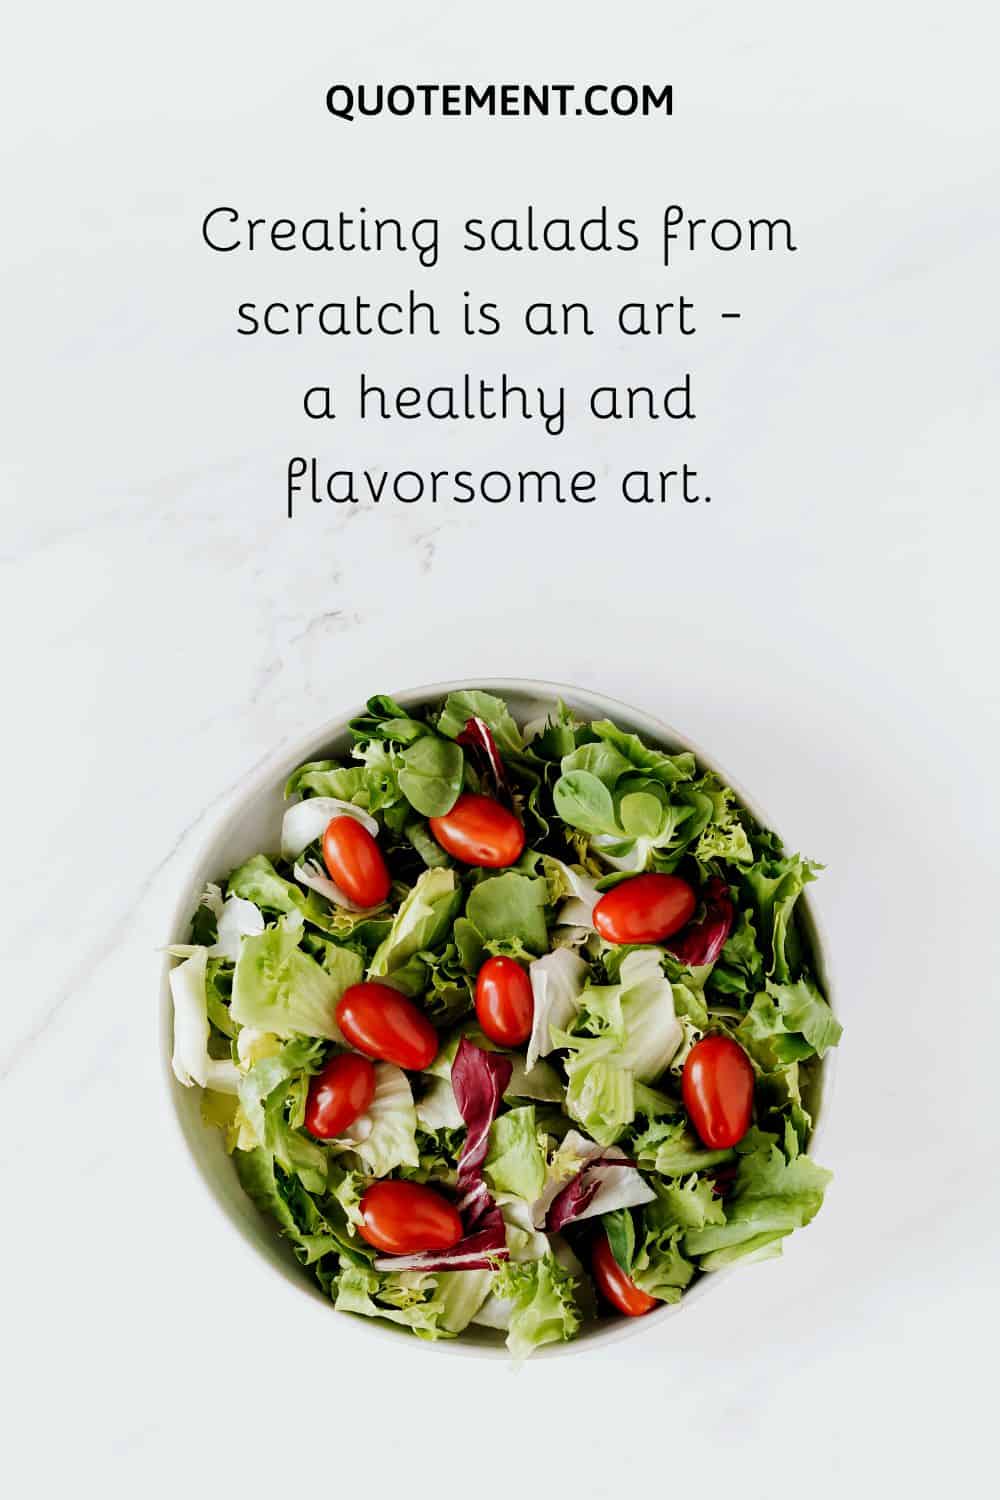 Creating salads from scratch is an art